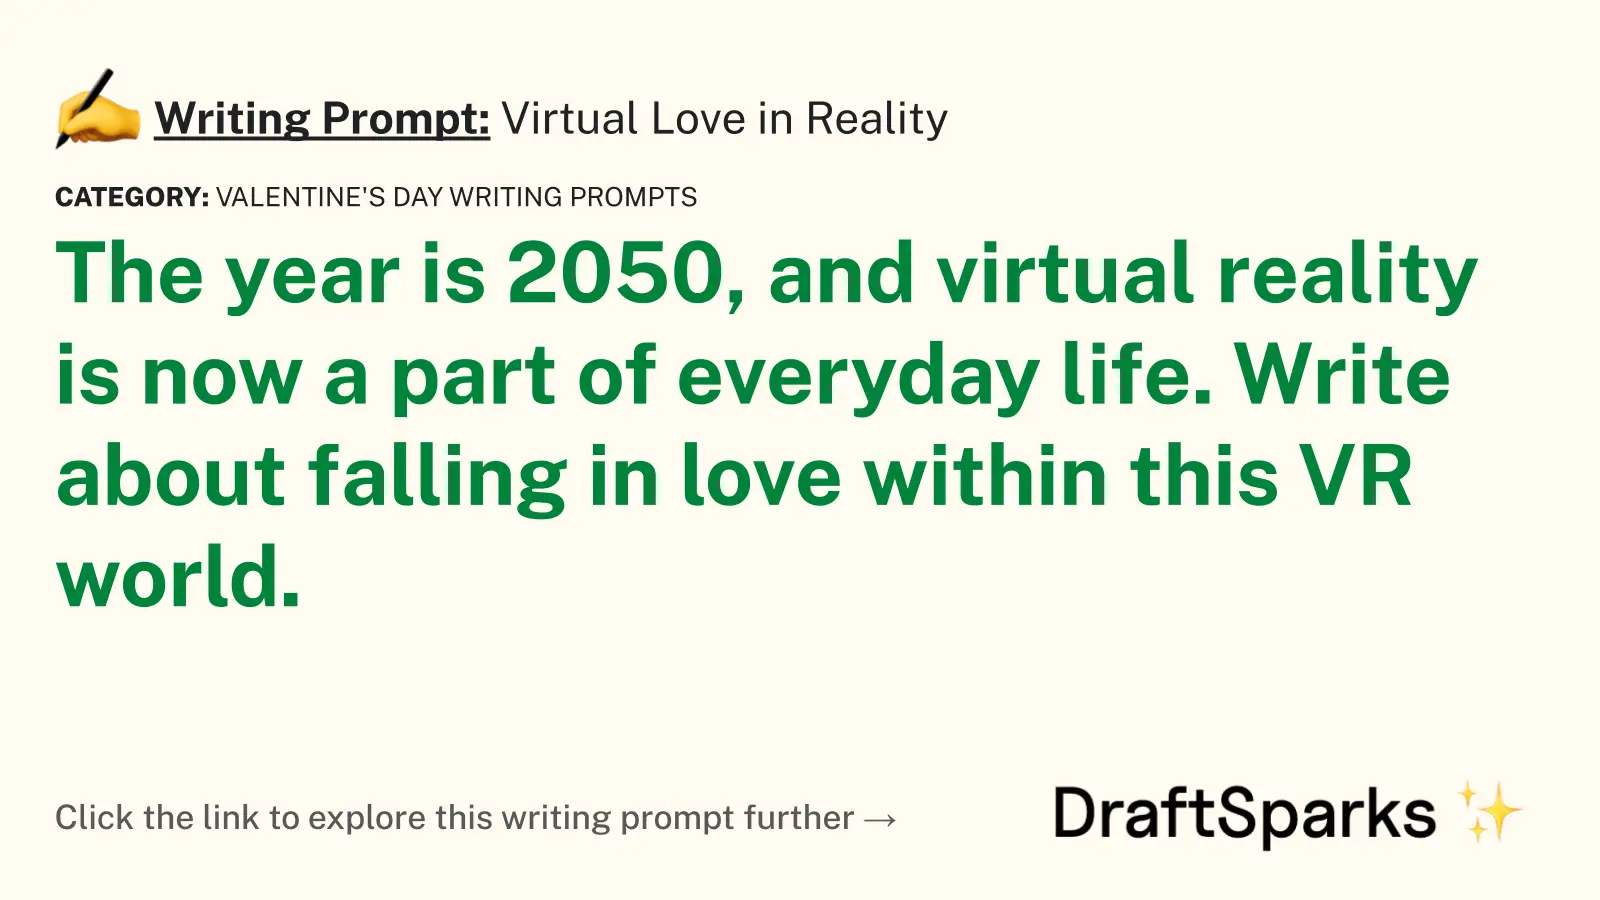 Virtual Love in Reality